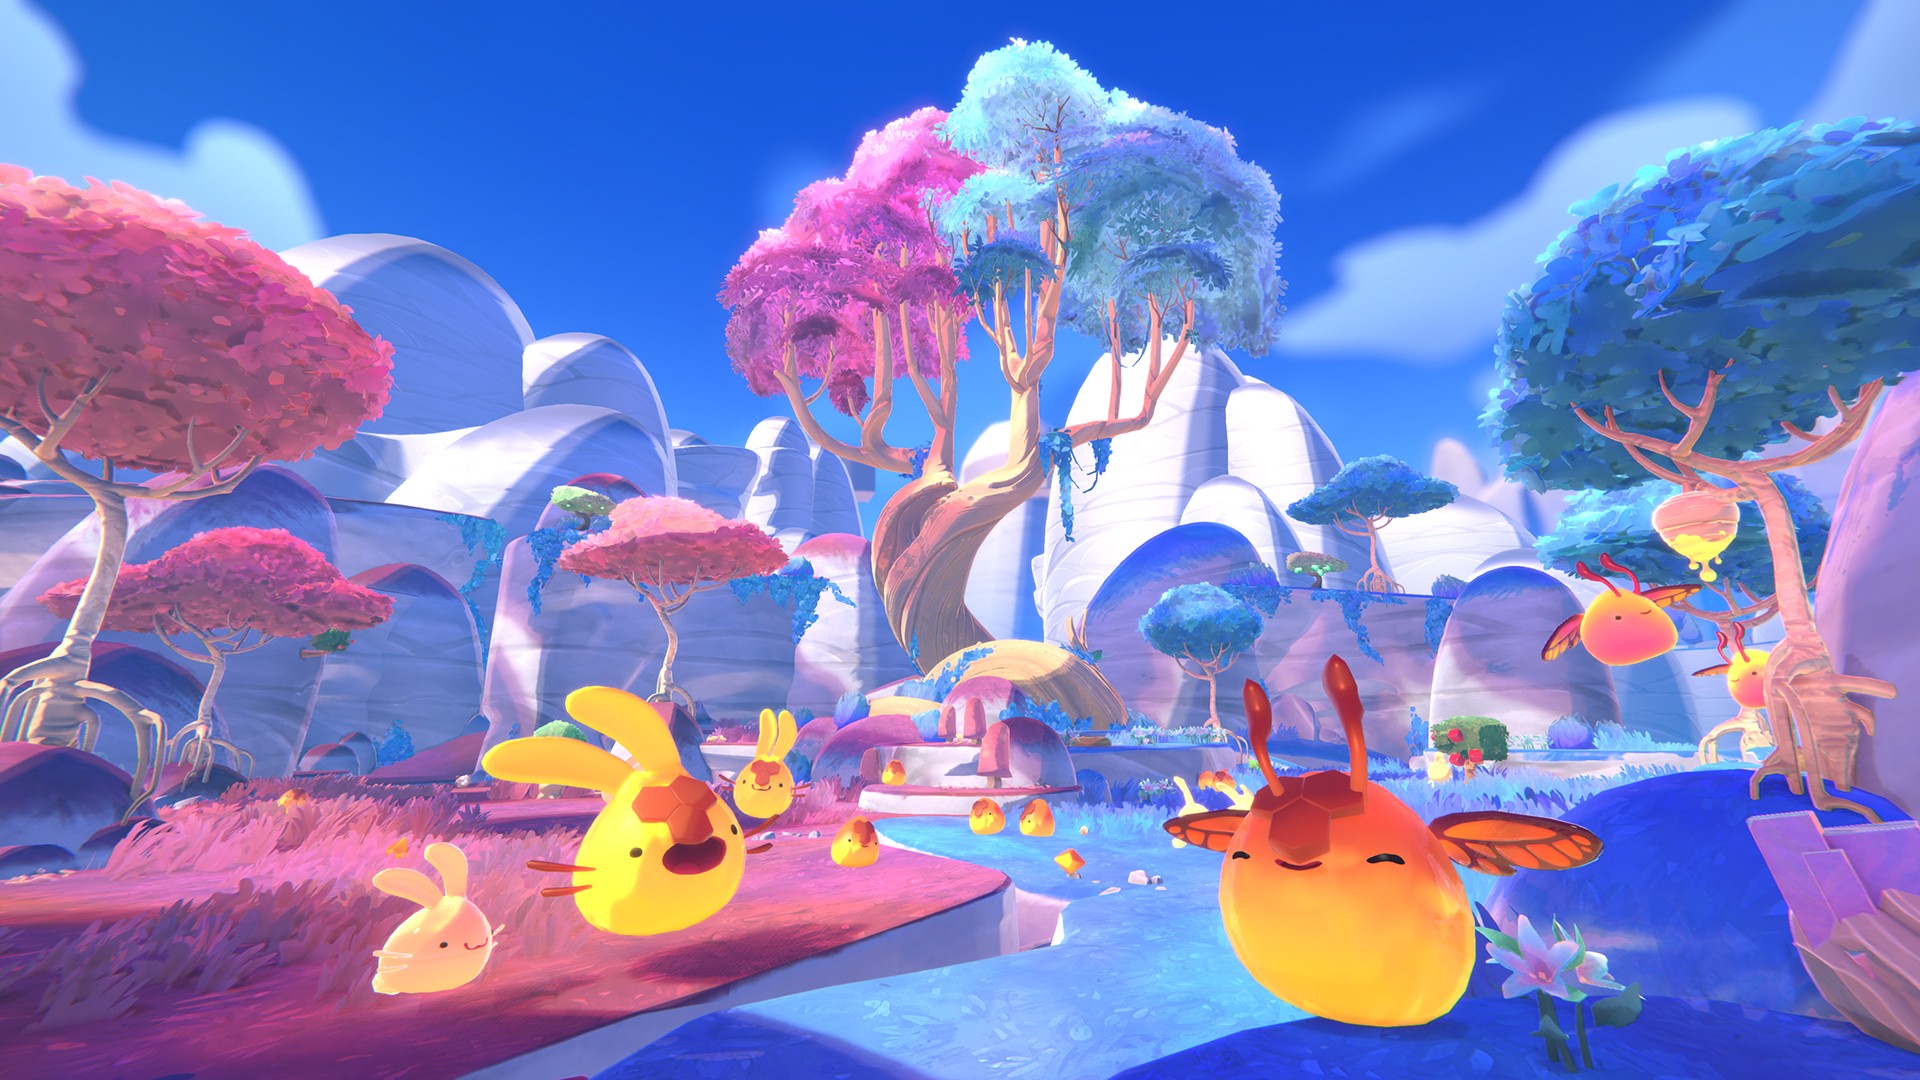 Slime Rancher 2 Returns for a Wiggly New Adventure